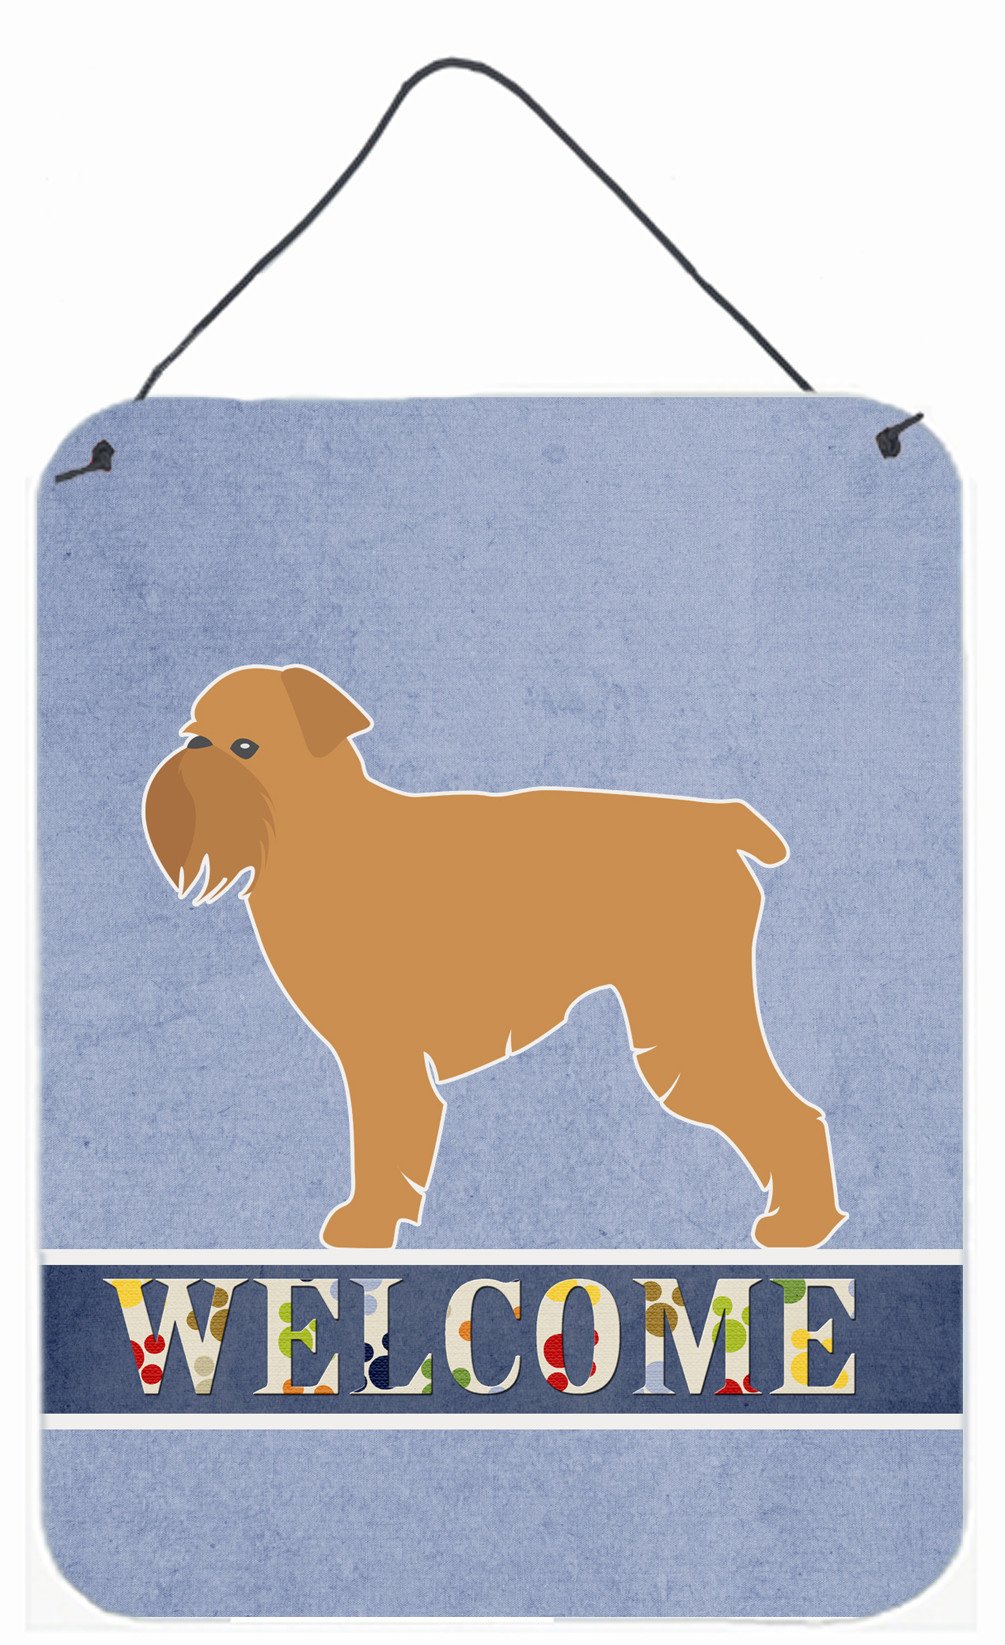 Brussels Griffon Welcome Wall or Door Hanging Prints BB5544DS1216 by Caroline's Treasures